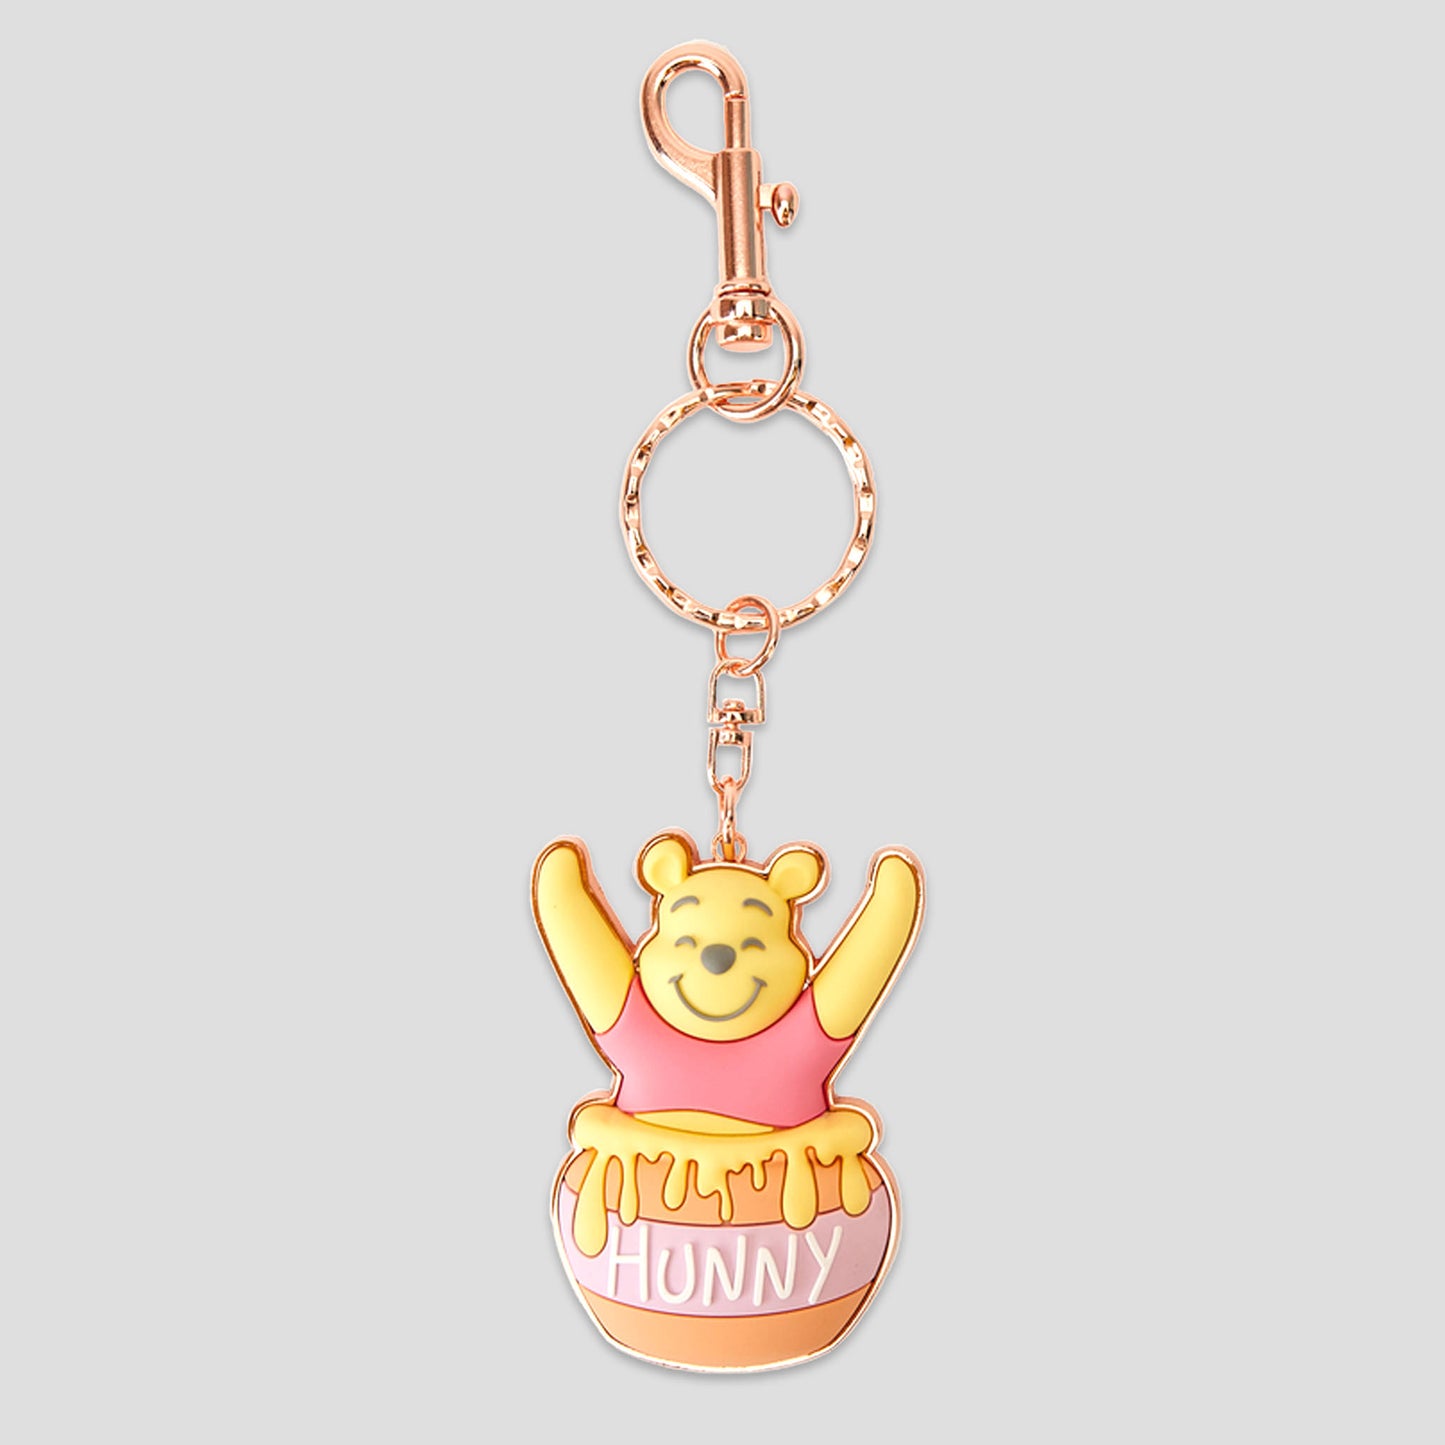 Winnie the Pooh (Disney) "Hunny Pot" Rose Gold Keychain by Loungefly